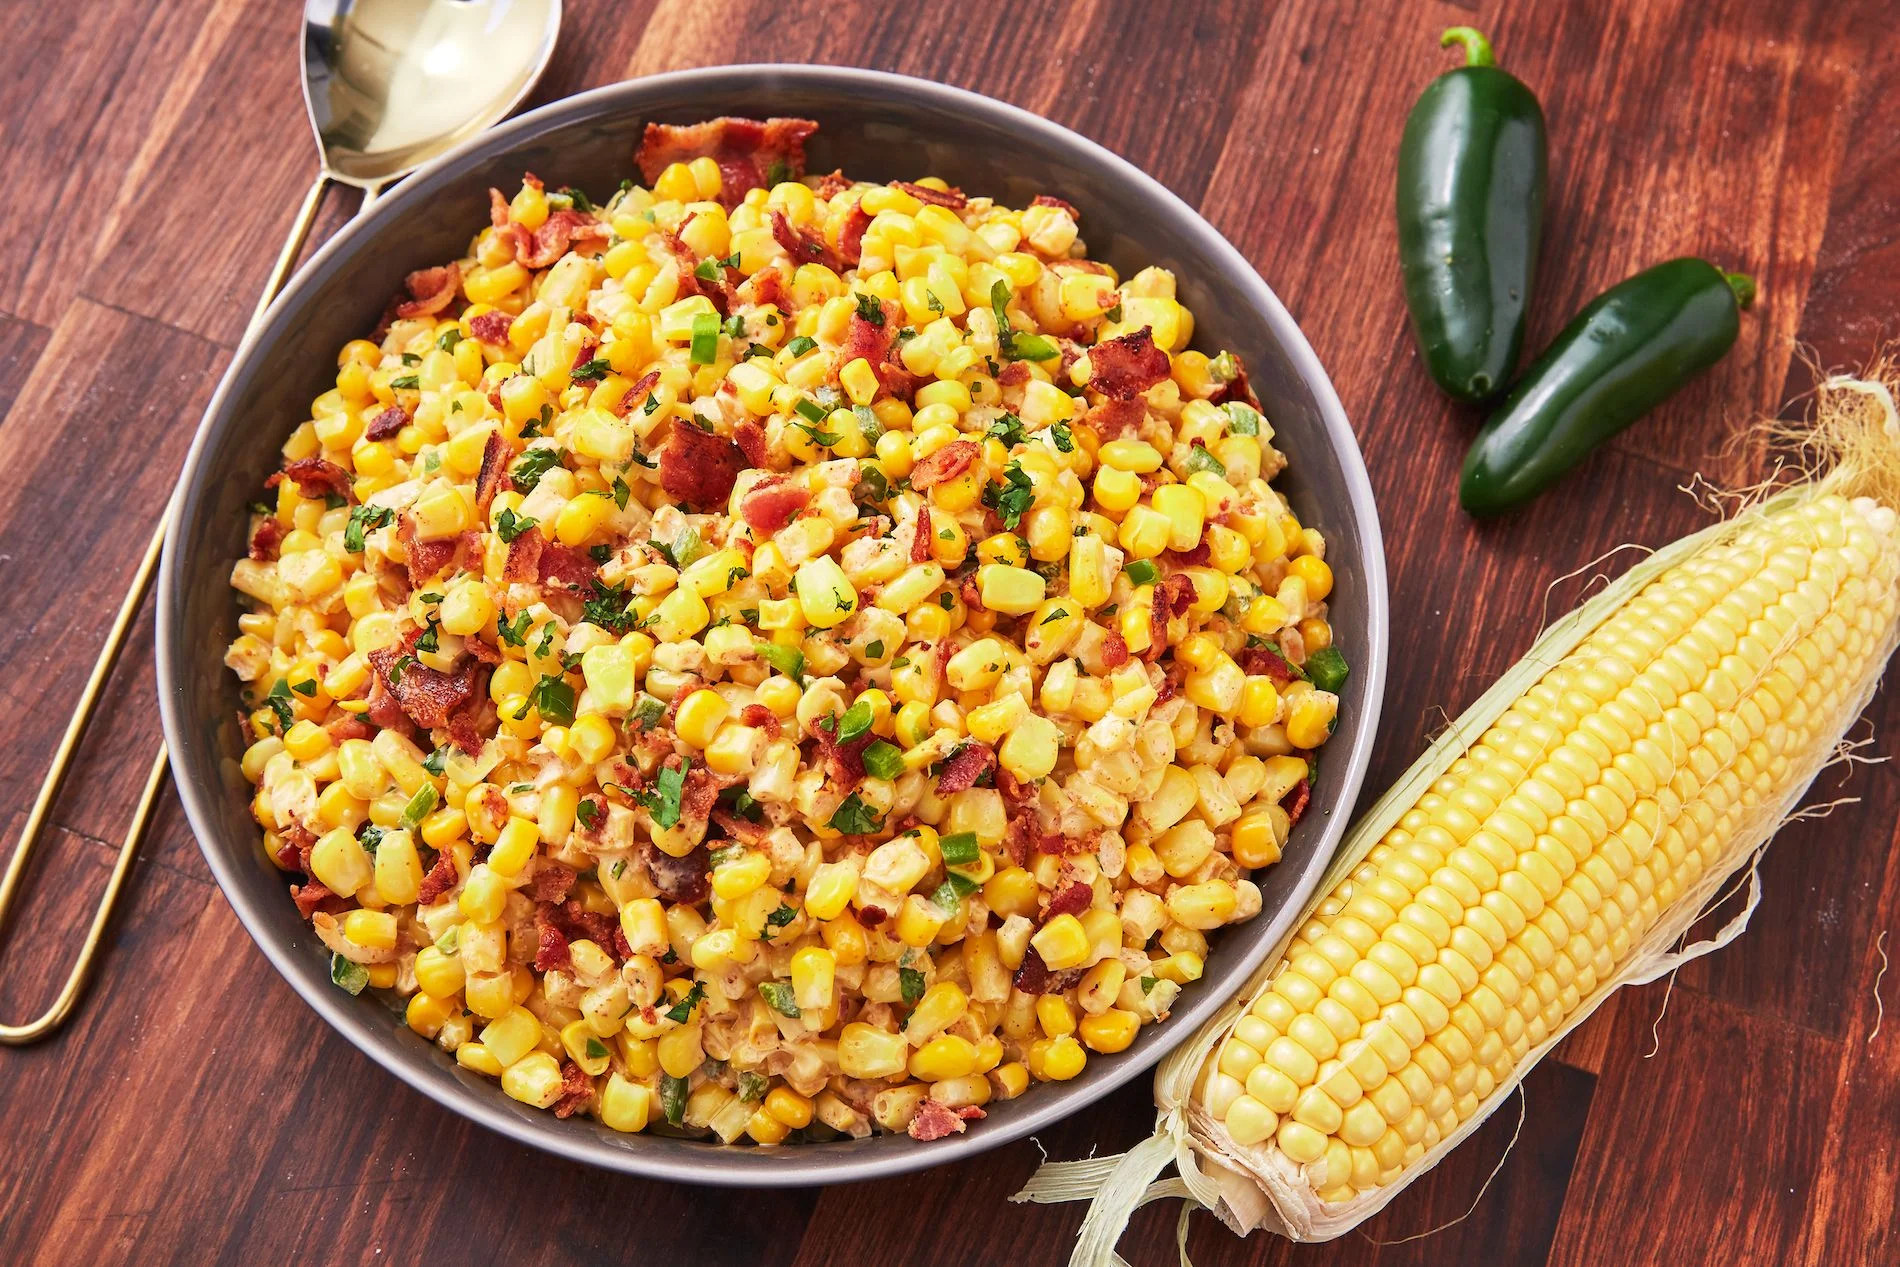 Corn salad with bacon and chili